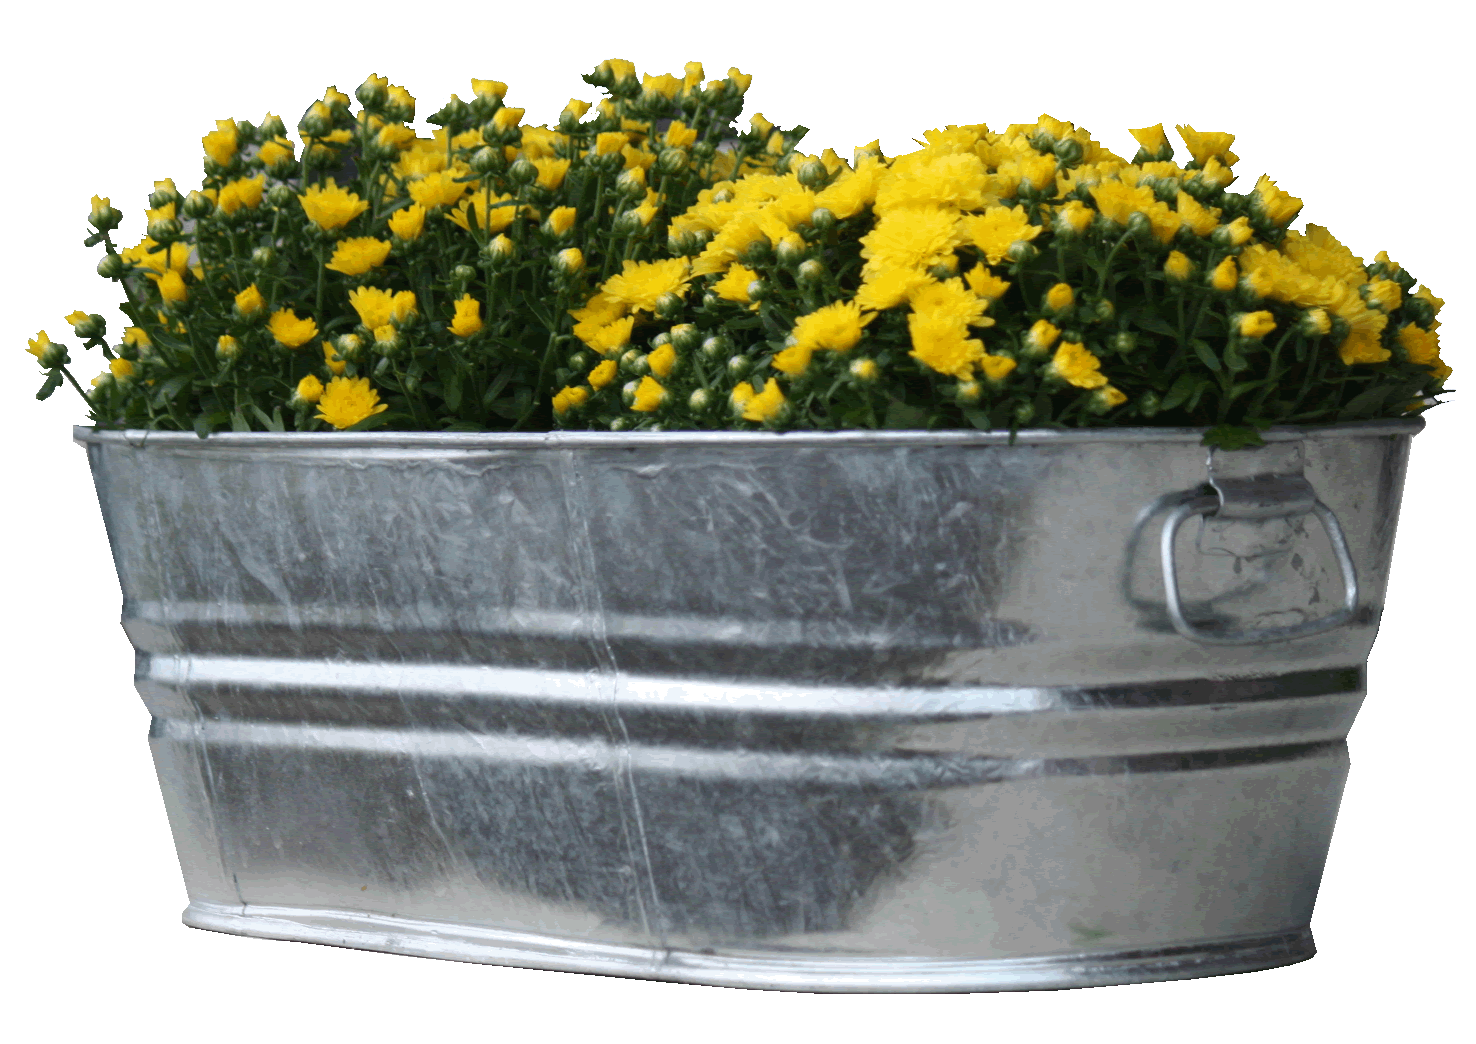 Raised beds in small galvanized tubs